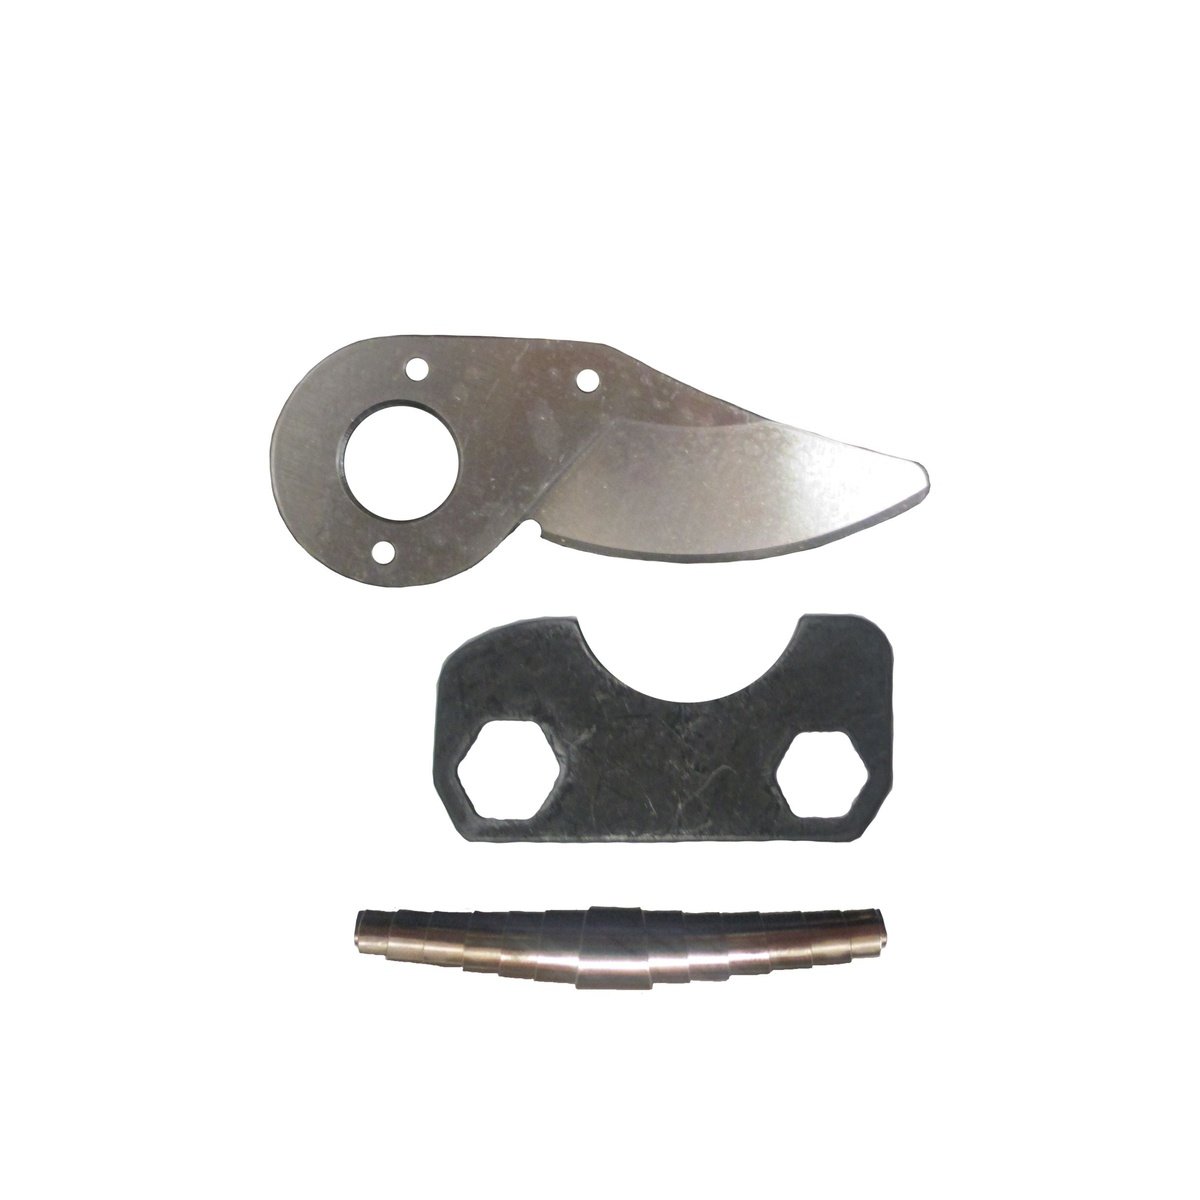 Felco 6/3-1 Replacement Cutting Blade,Spring and Key Set